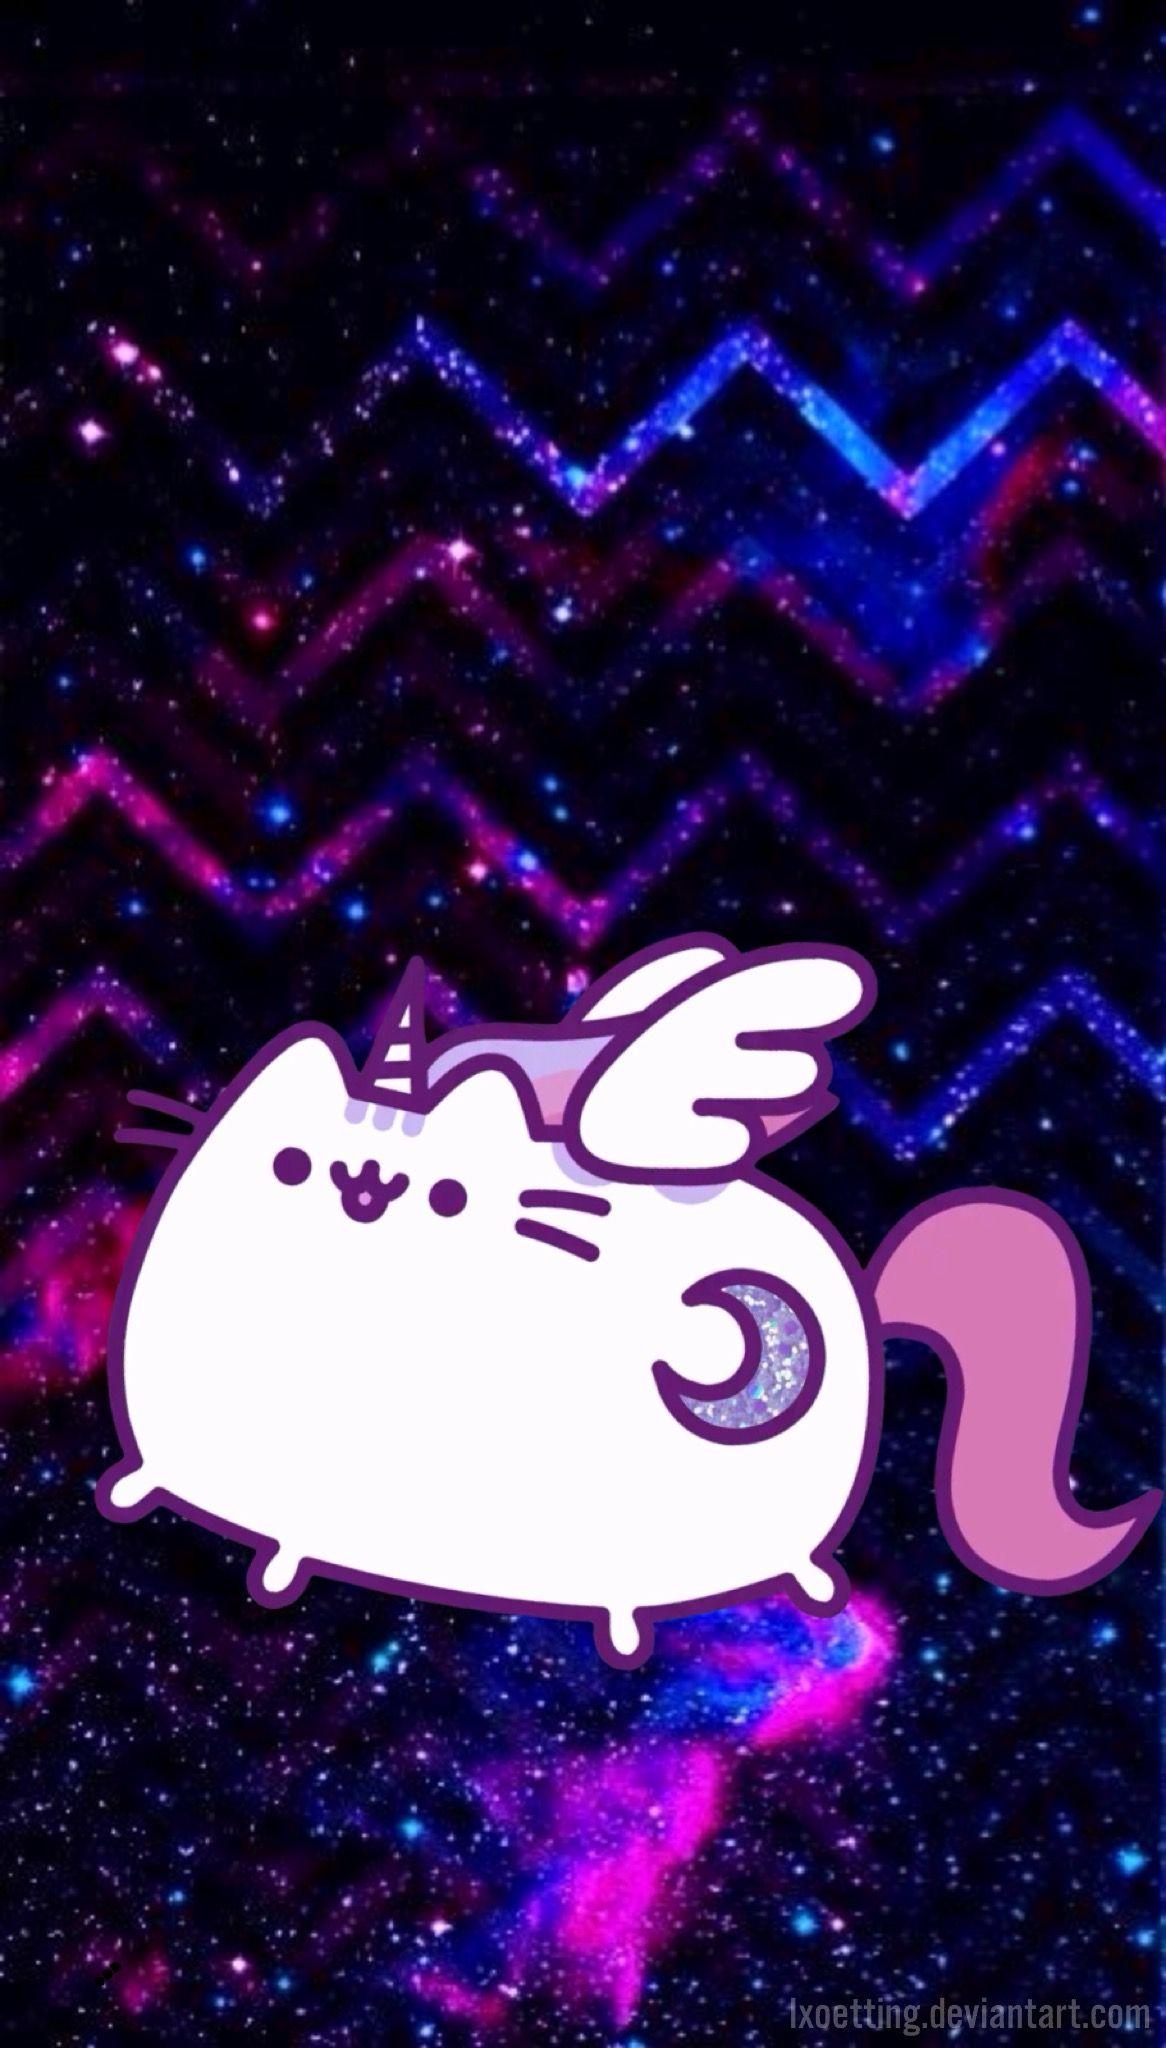 OMG!!! Pusheen and Unicorn in one picture, in one body!!! I LOVE!!! PUSHEENICORN Super pusheenicorn wallpaper! #superpus. Pusheen cute, Pusheen cat, Cat wallpaper